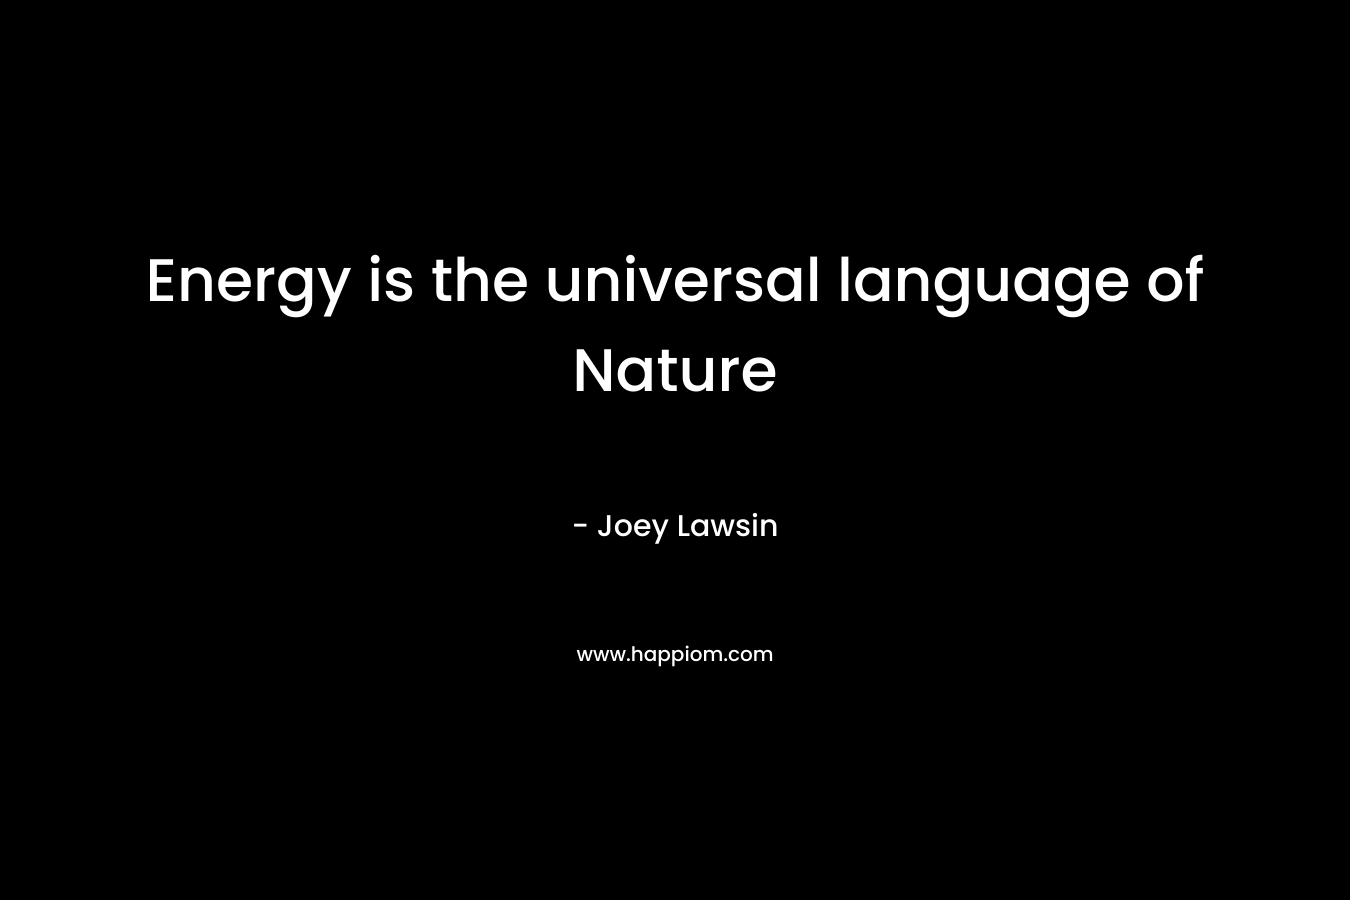 Energy is the universal language of Nature